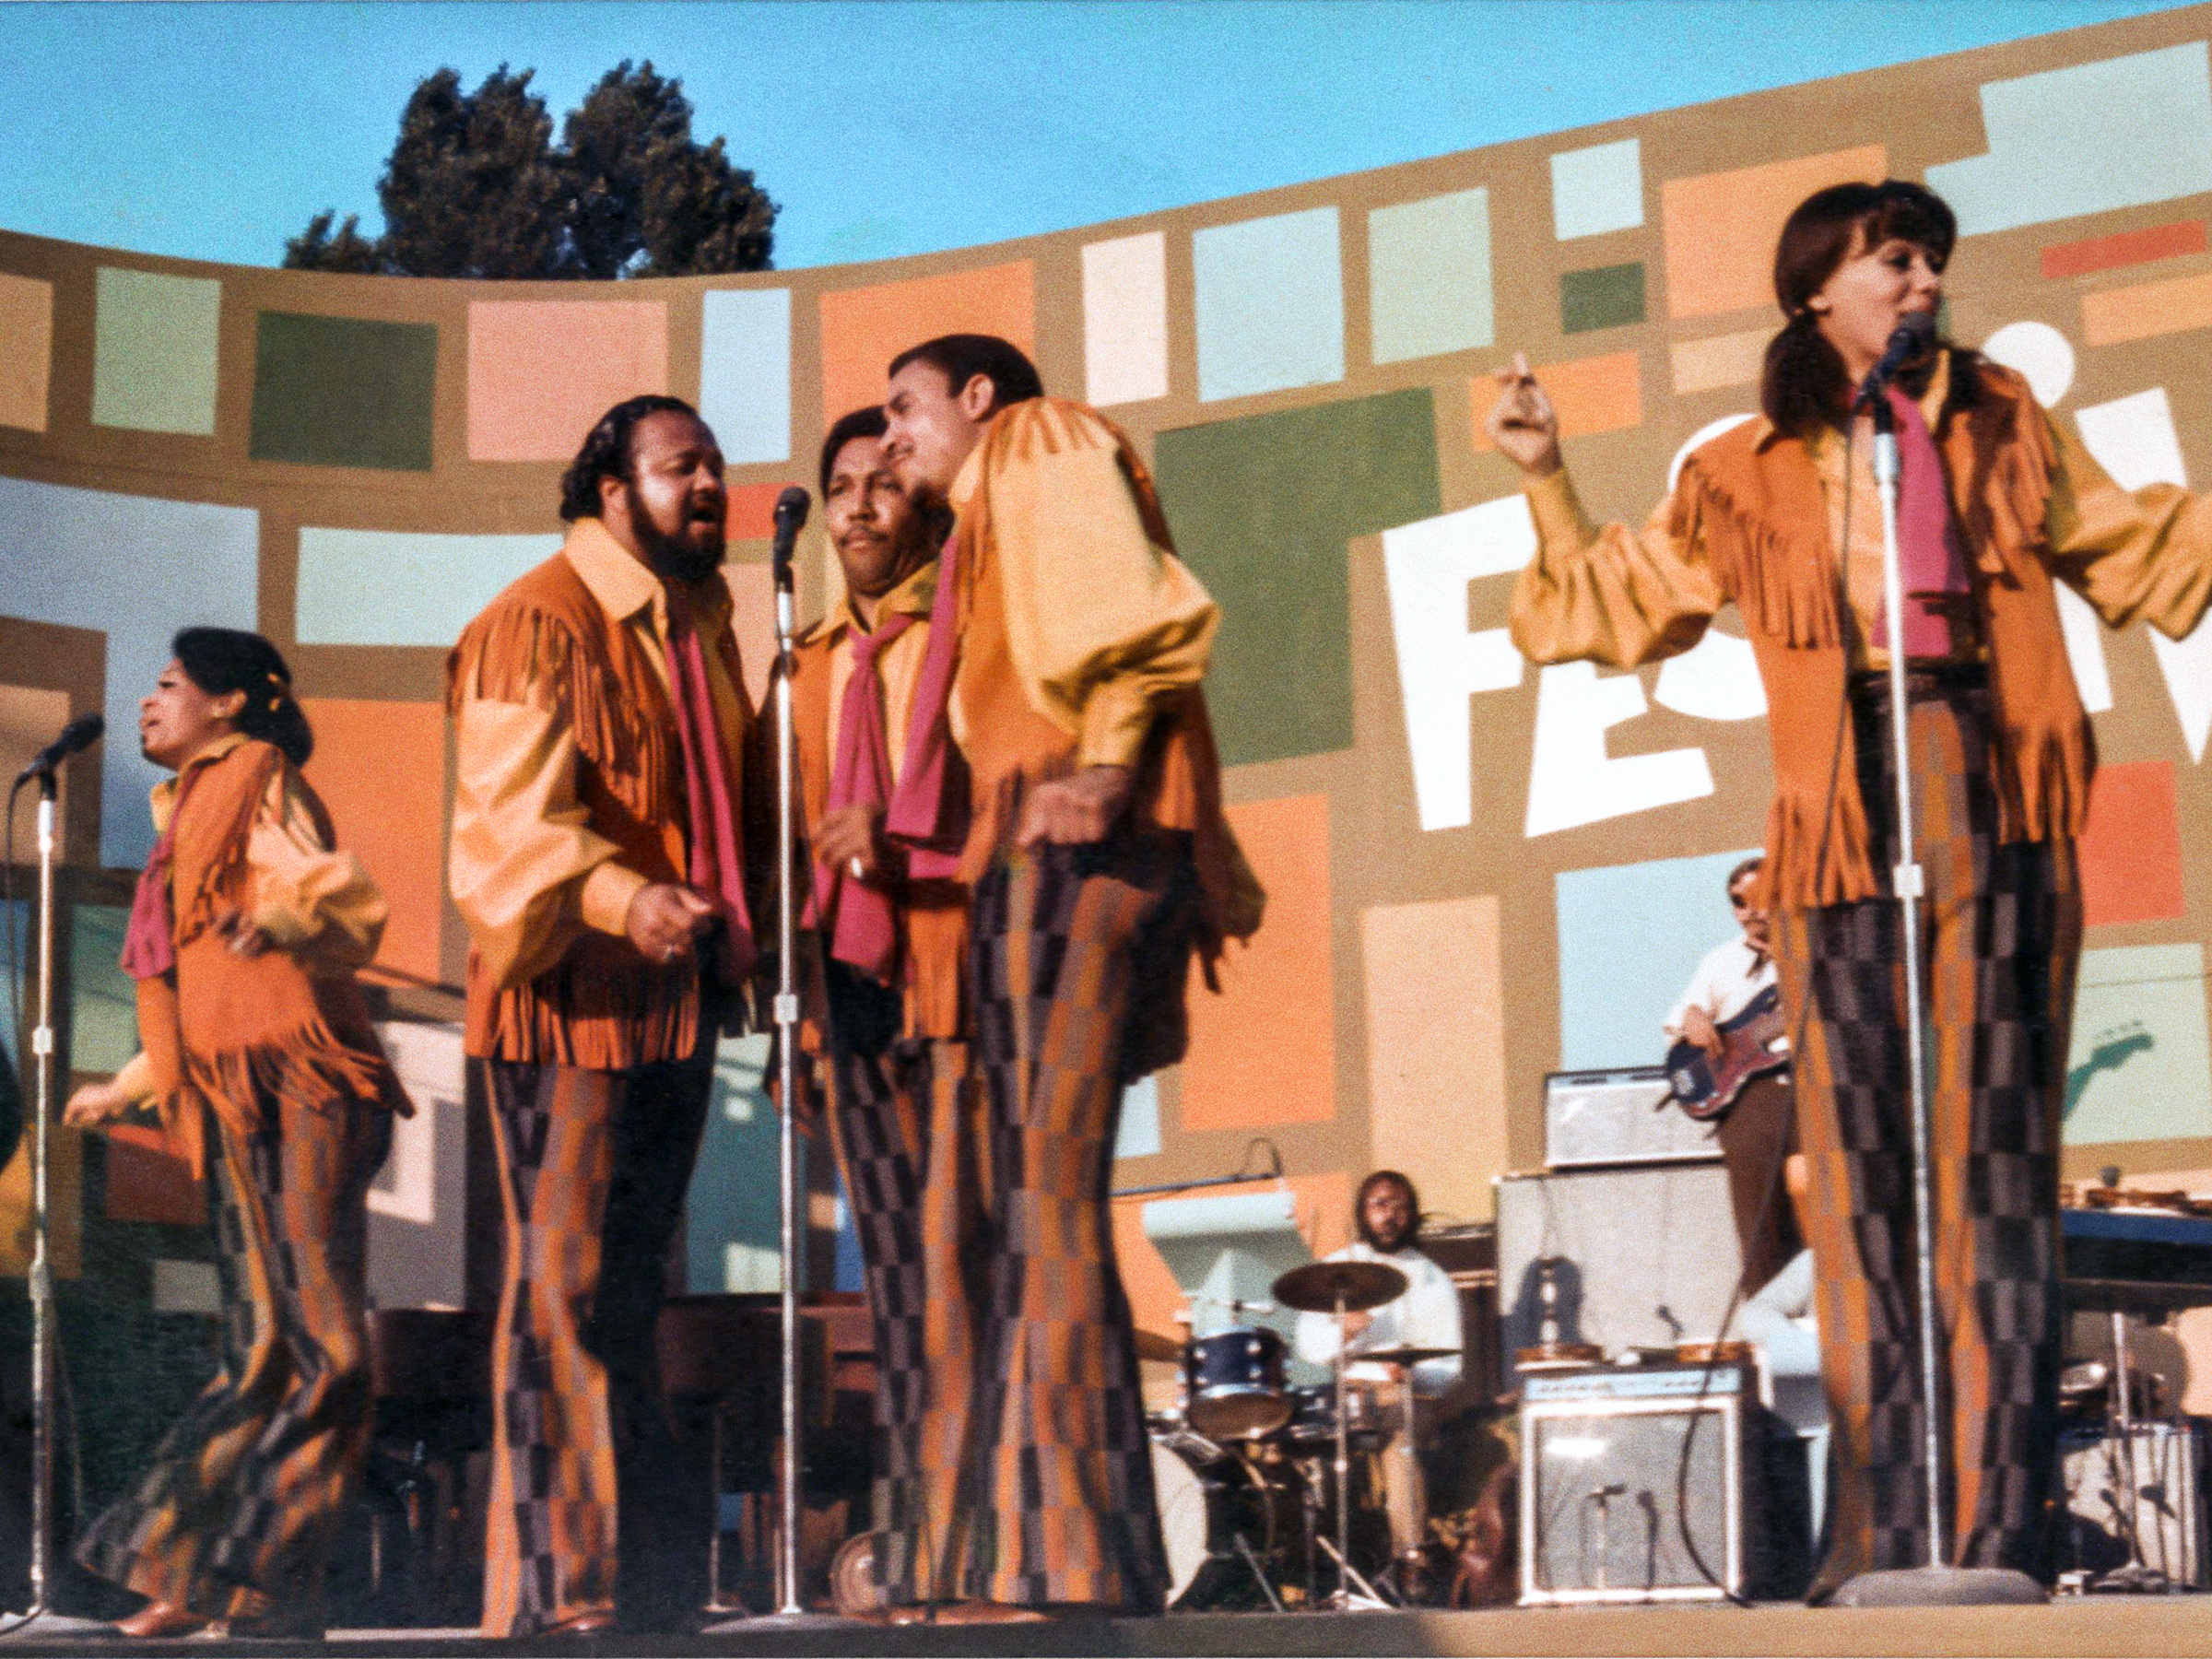 The 5th Dimension performing at the Harlem Cultural Festival in 1969, featured in the documentary 'Summer of Soul.' (Searchlight Pictures)